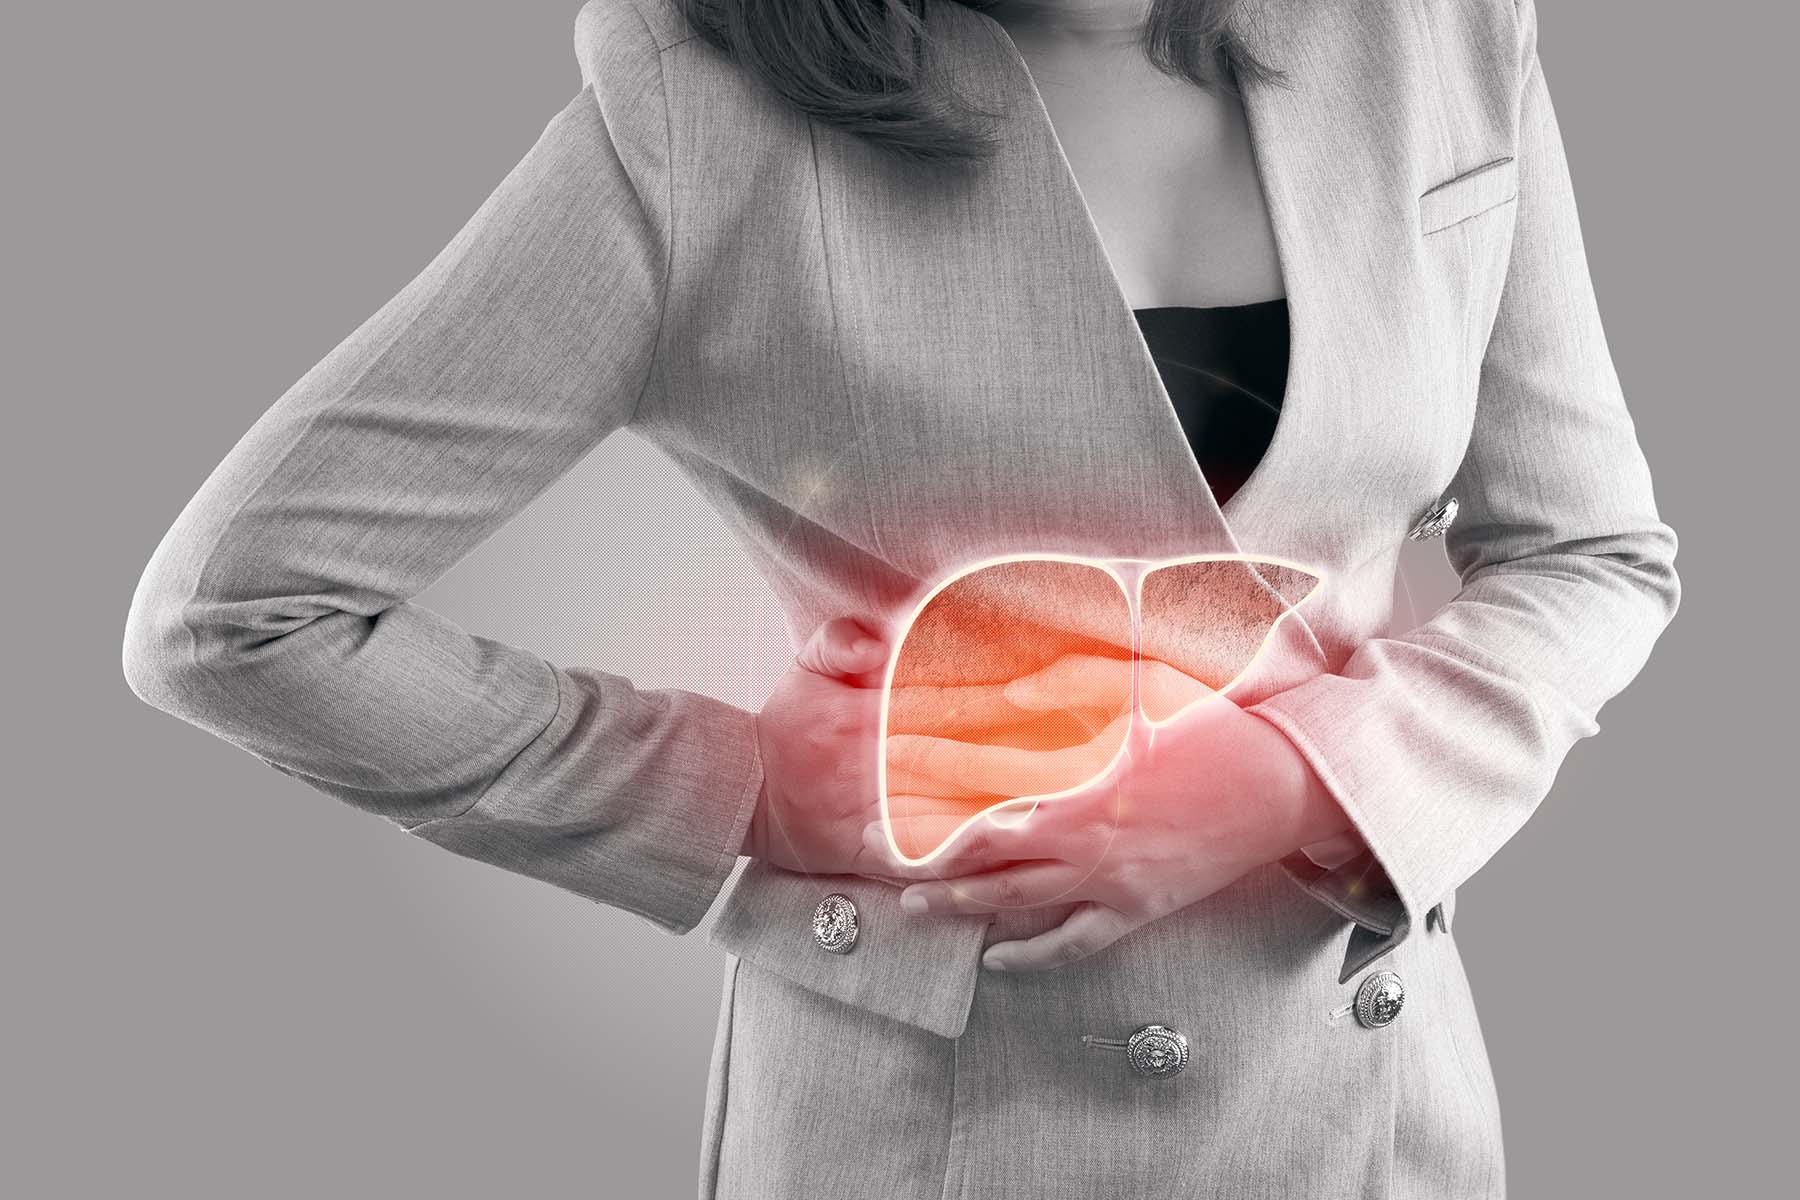 Grayed out image of woman in business suit with graphic of her liver being a source of pain.